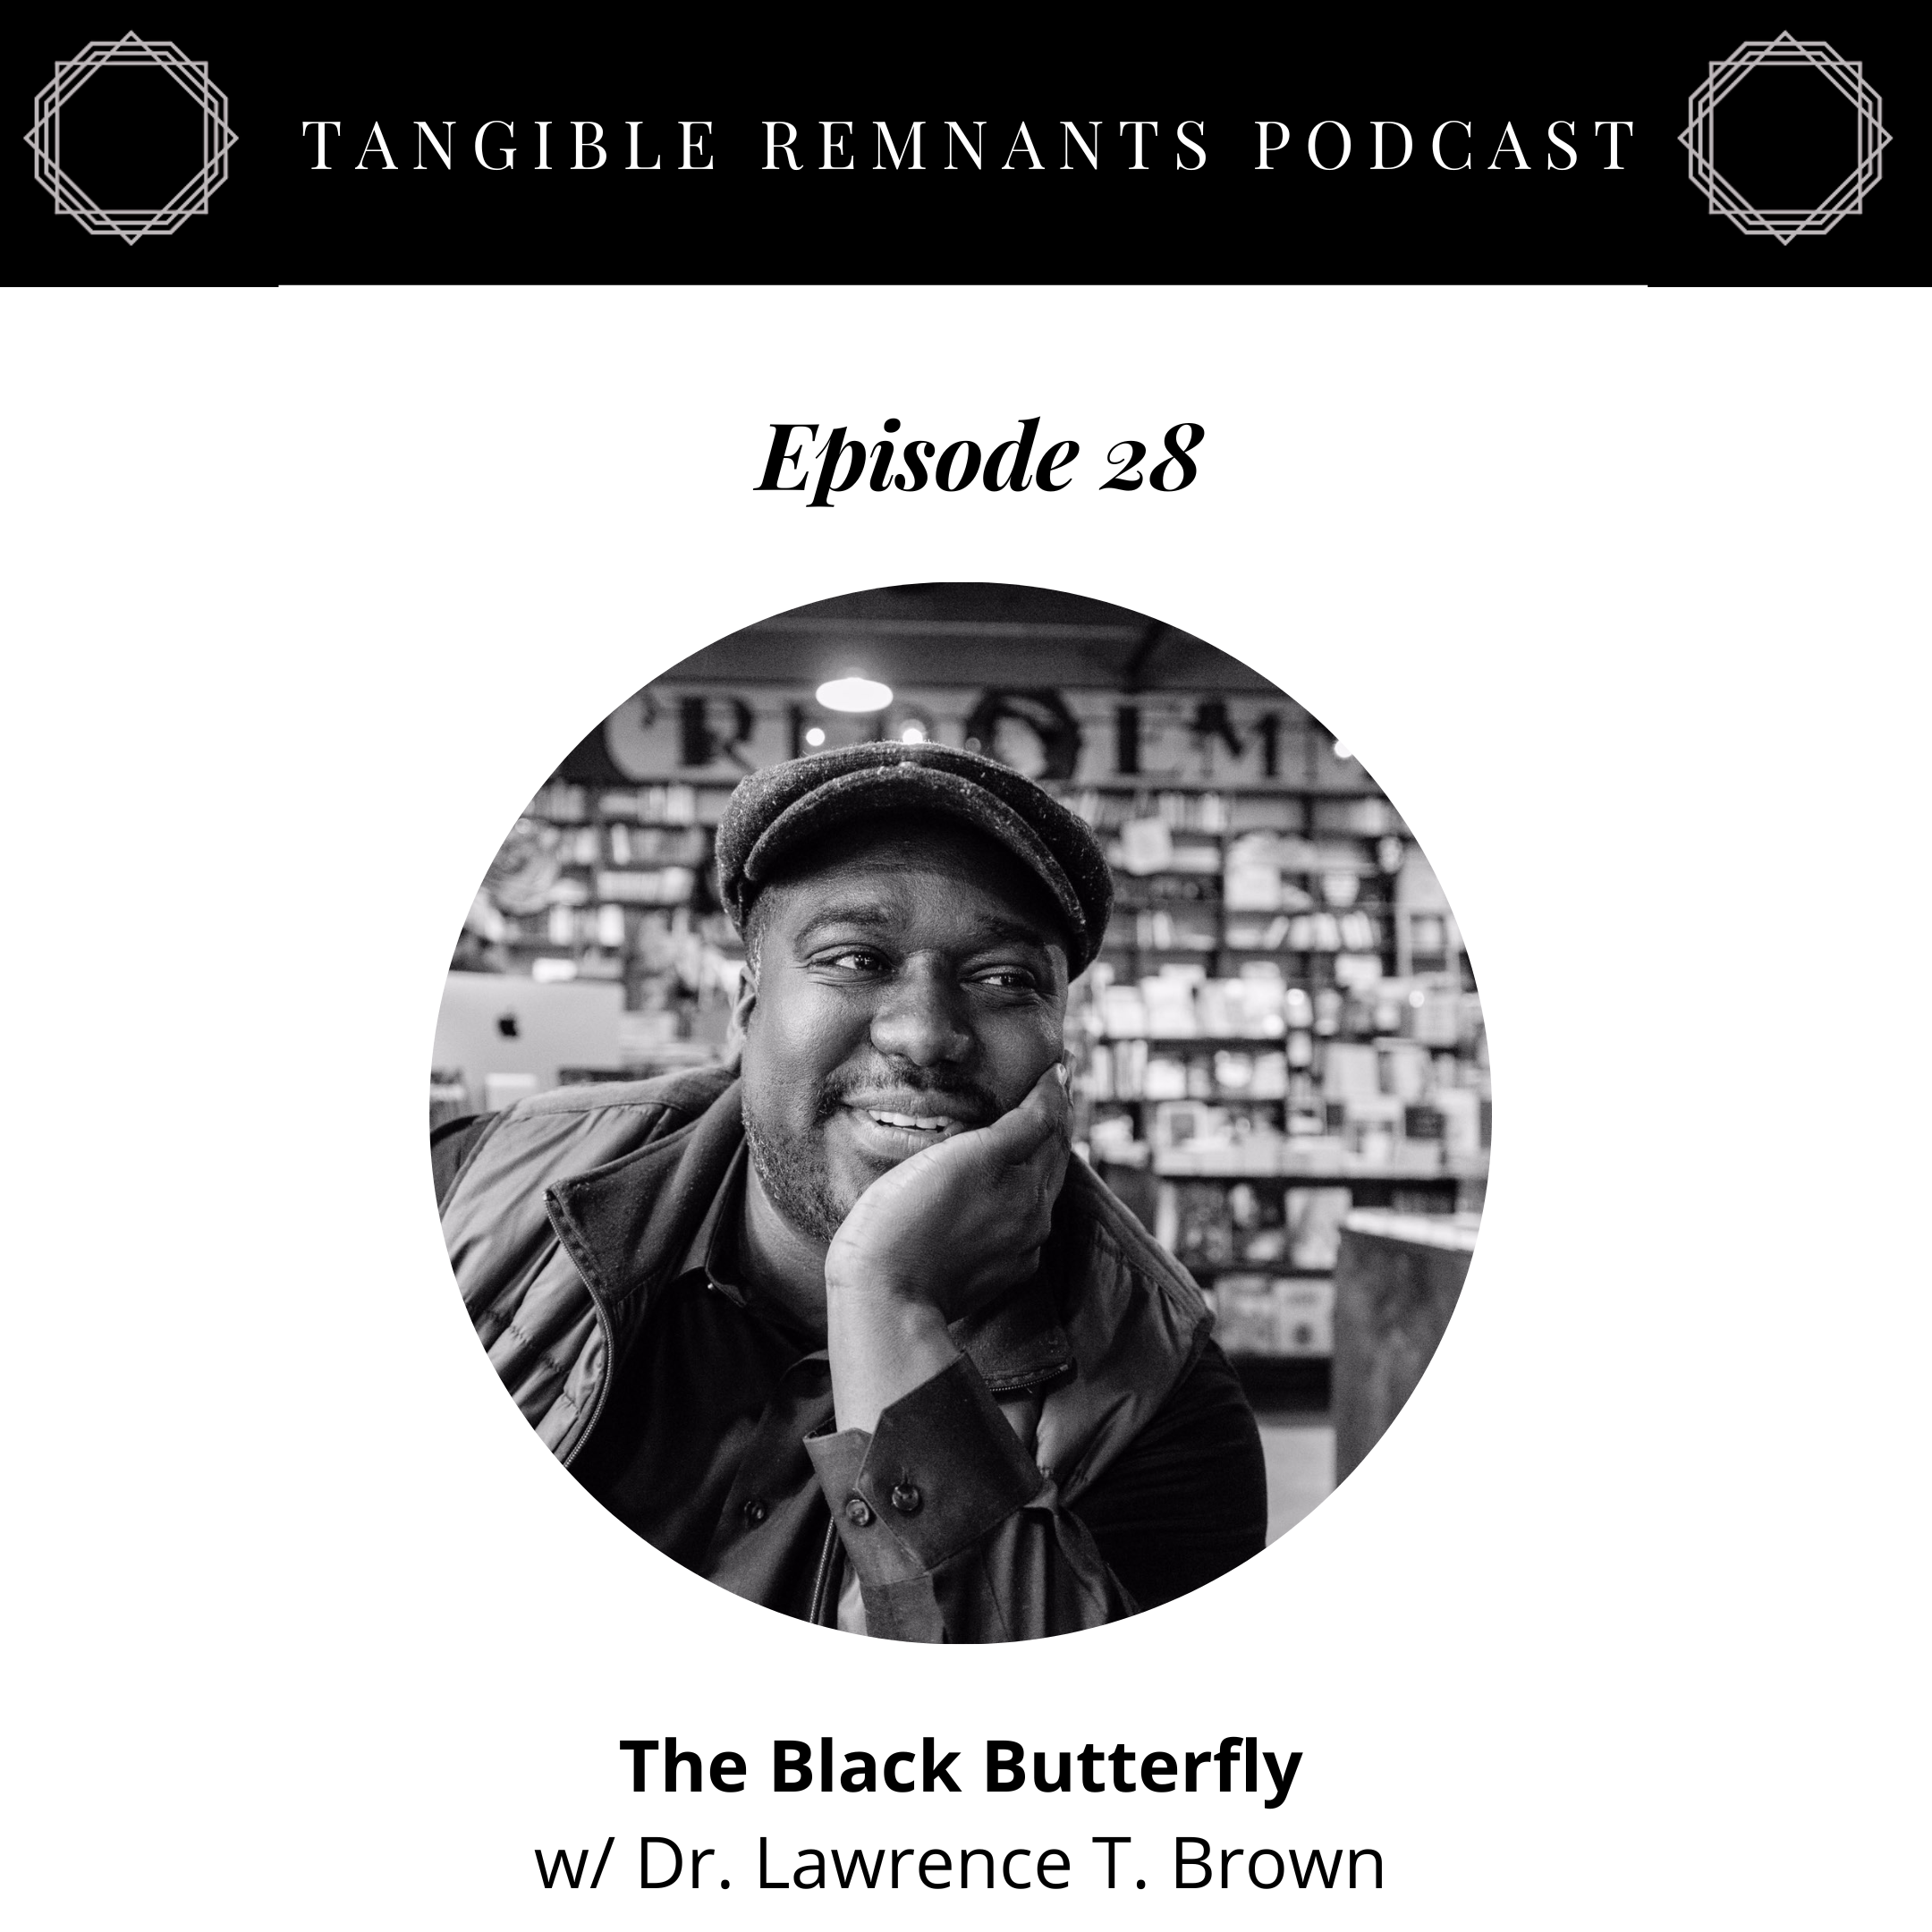 The Black Butterfly w/ Dr. Lawrence T. Brown (audio updated)